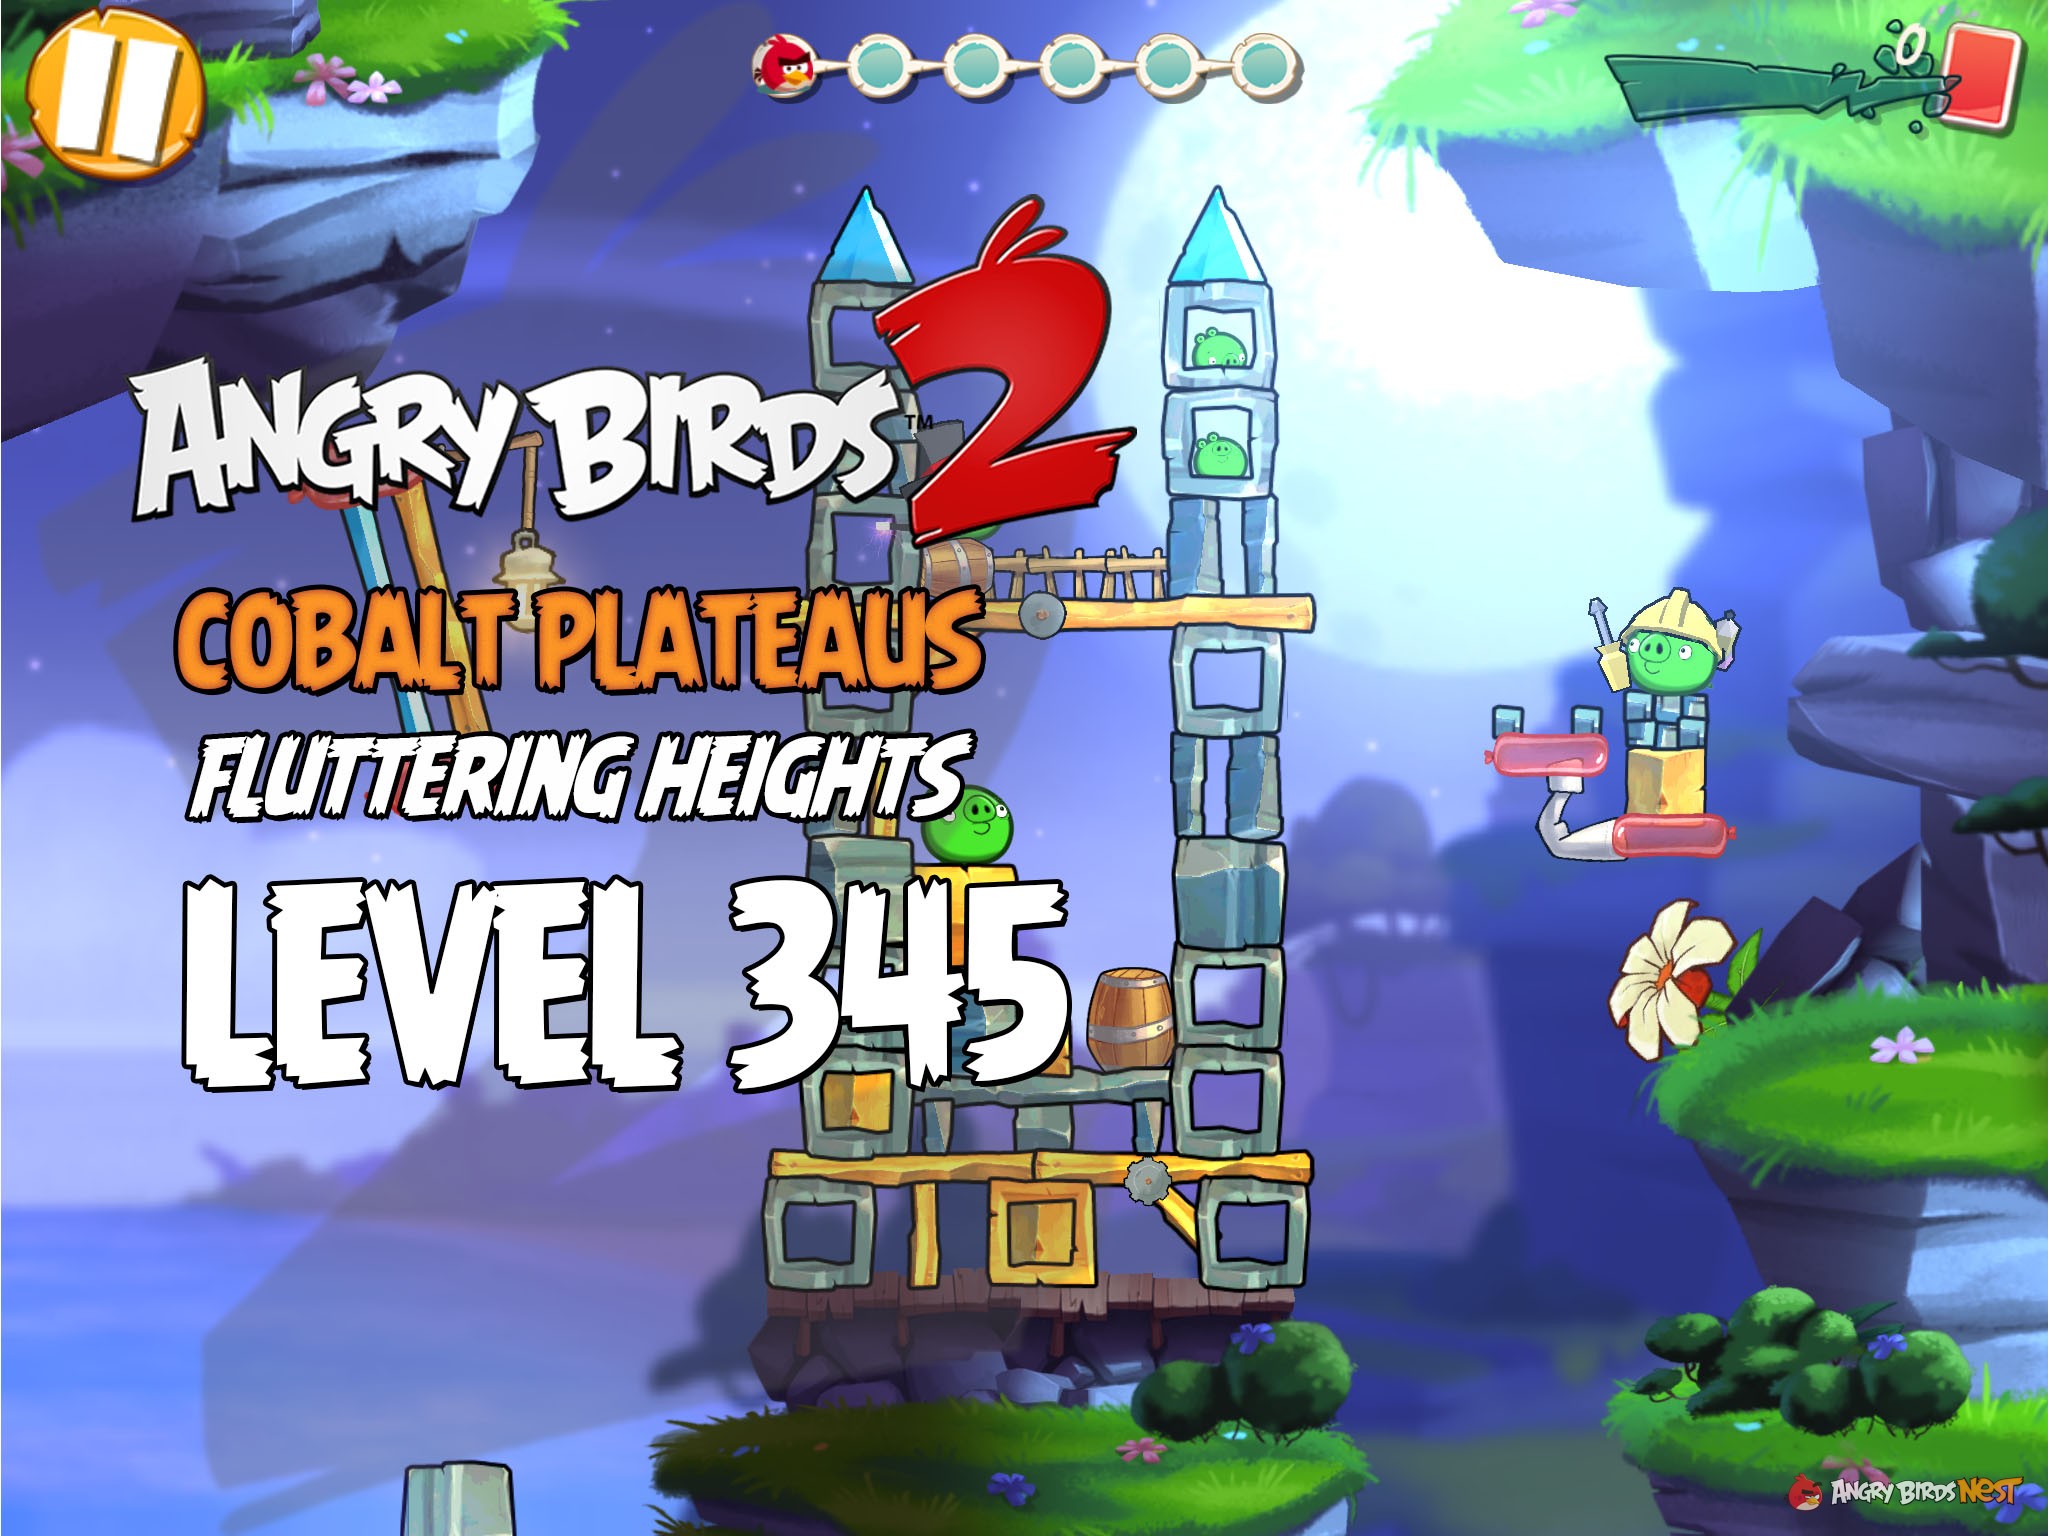 Angry Birds 2 Cobalt Plateaus Fluttering Heights Level 345